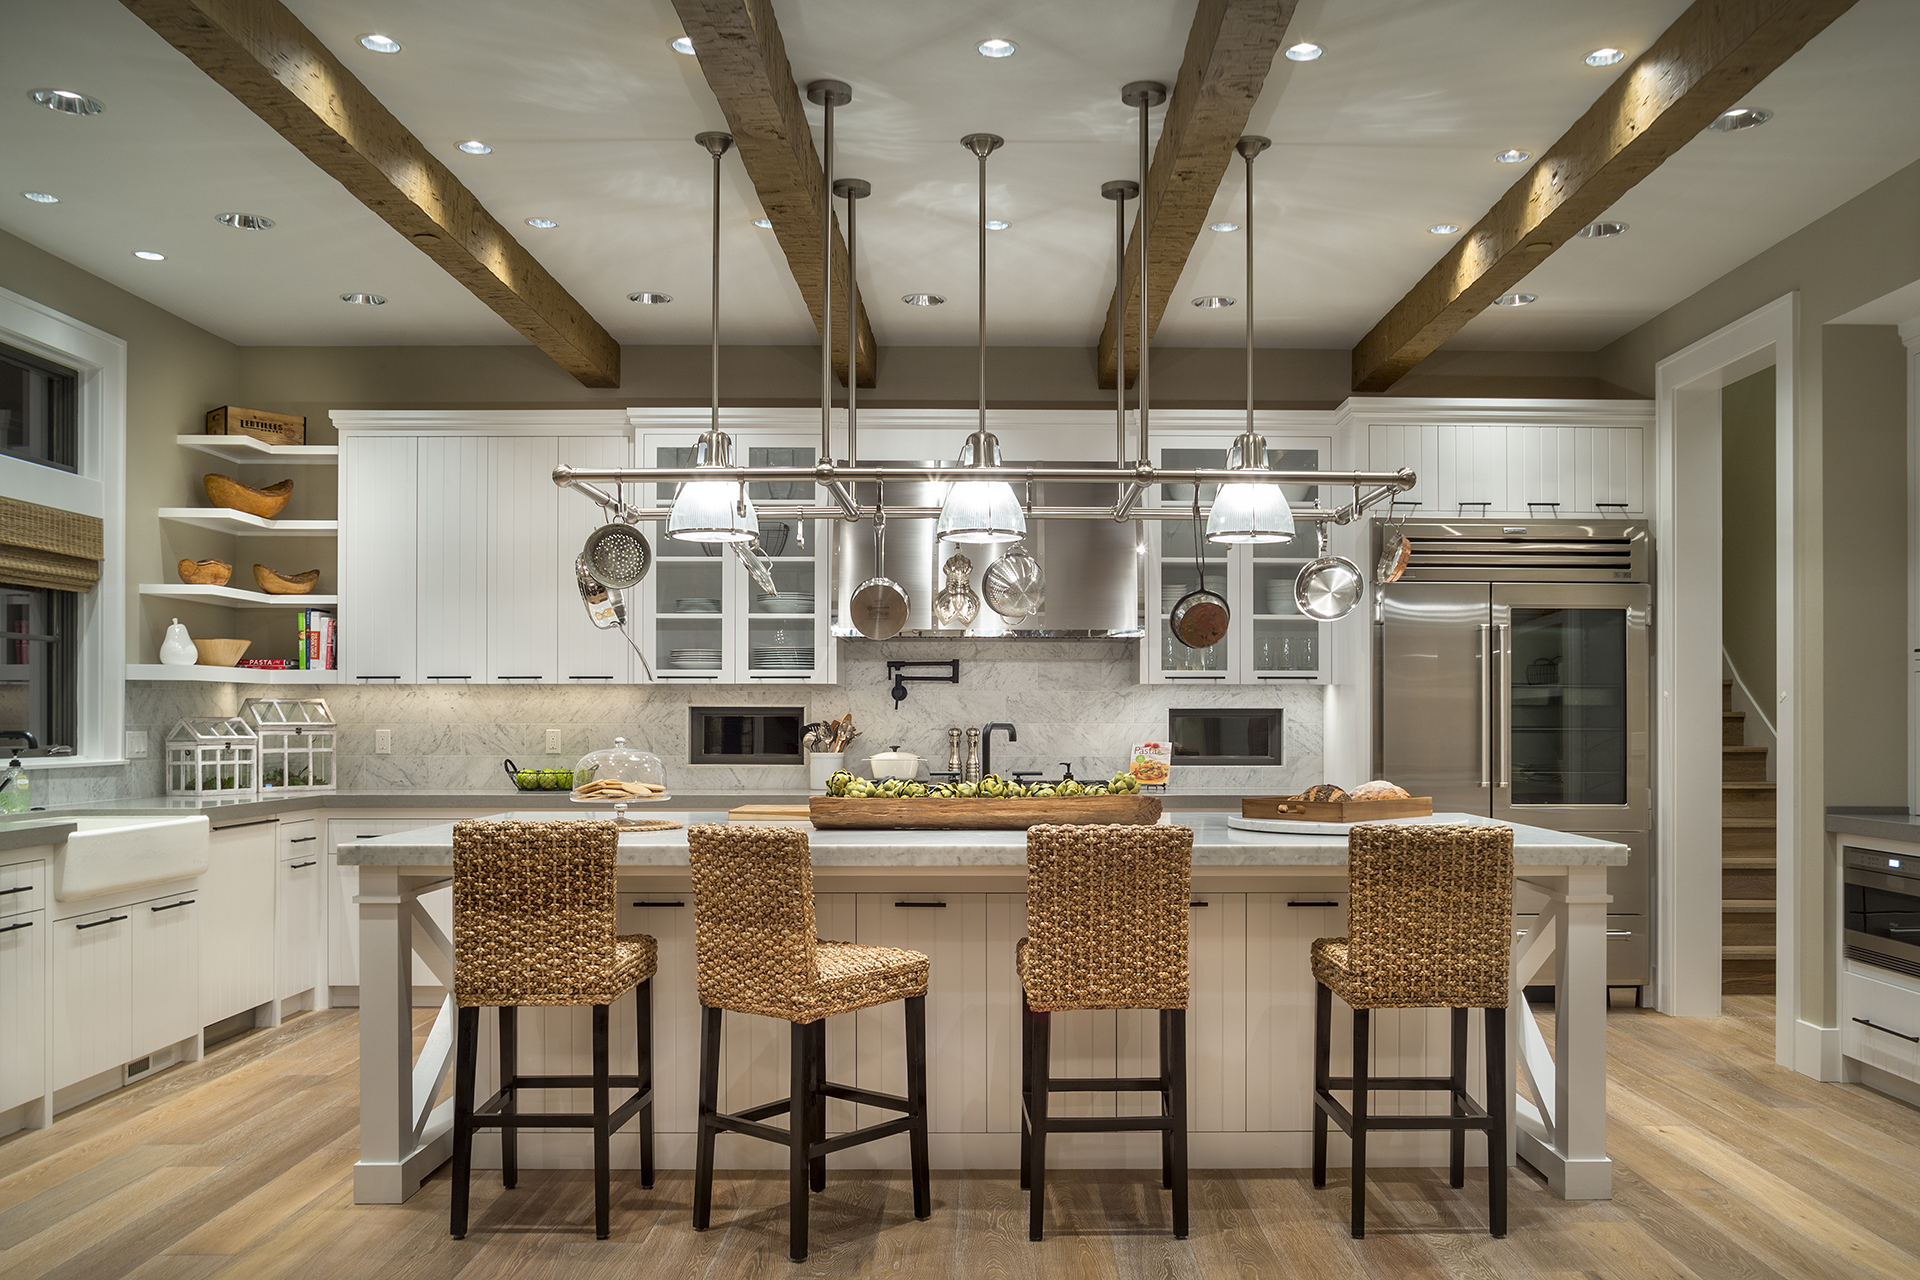 Great Kitchen Designs for the Holidays   DFD House Plans Blog